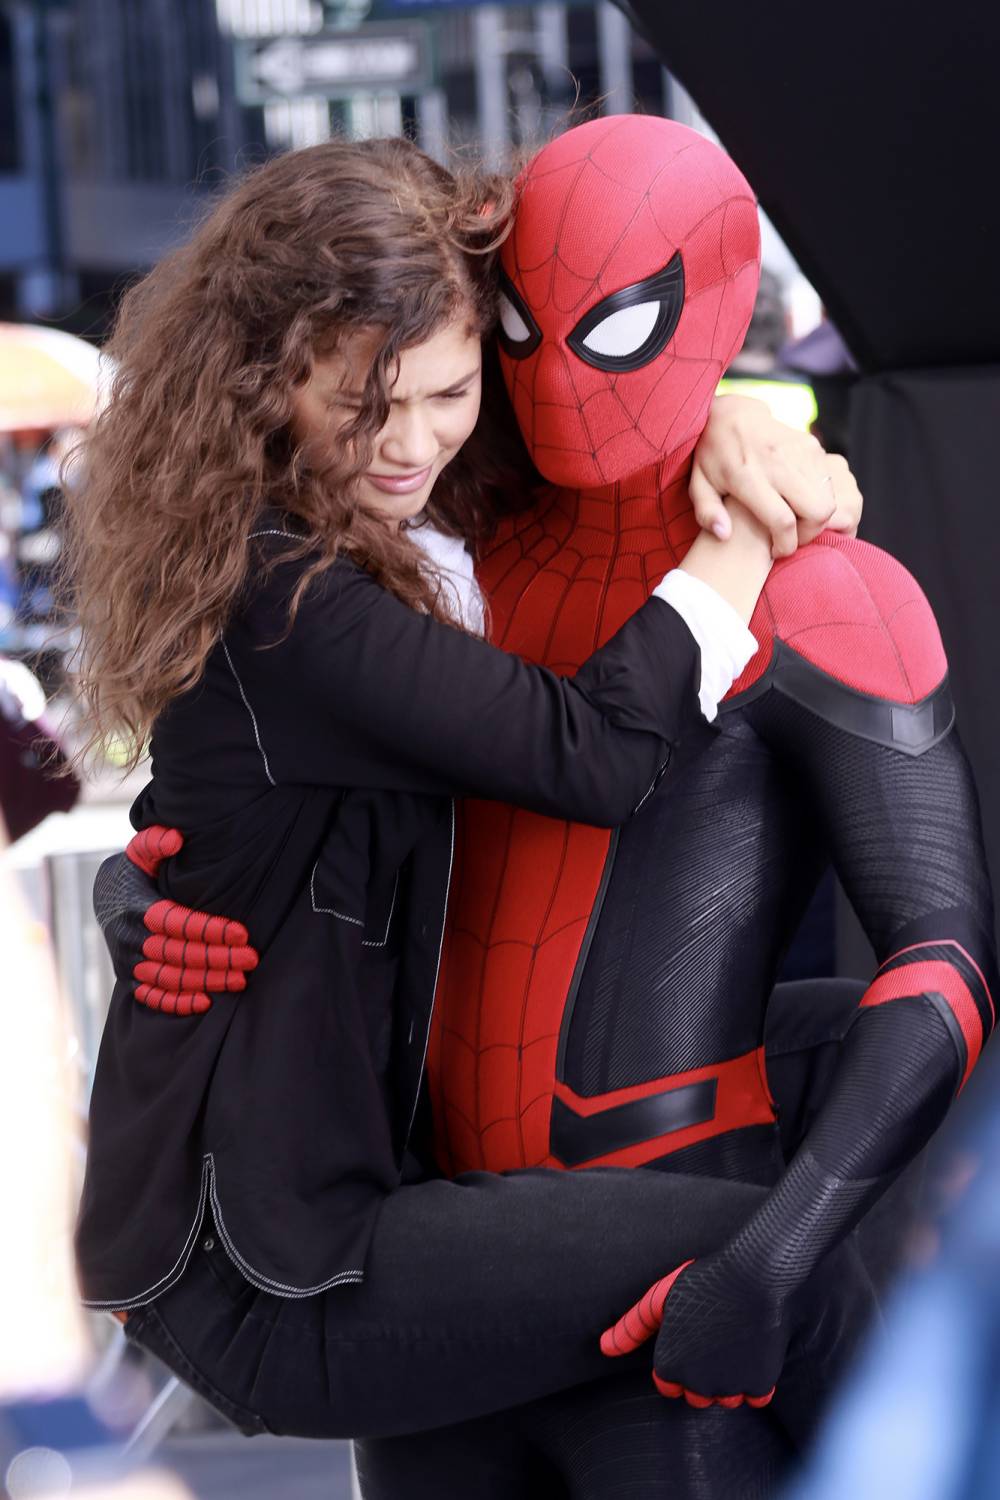 Zendaya Is ‘Grateful’ for ‘Special’ Experience Working With Tom Holland on 'Spider-Man' Franchise